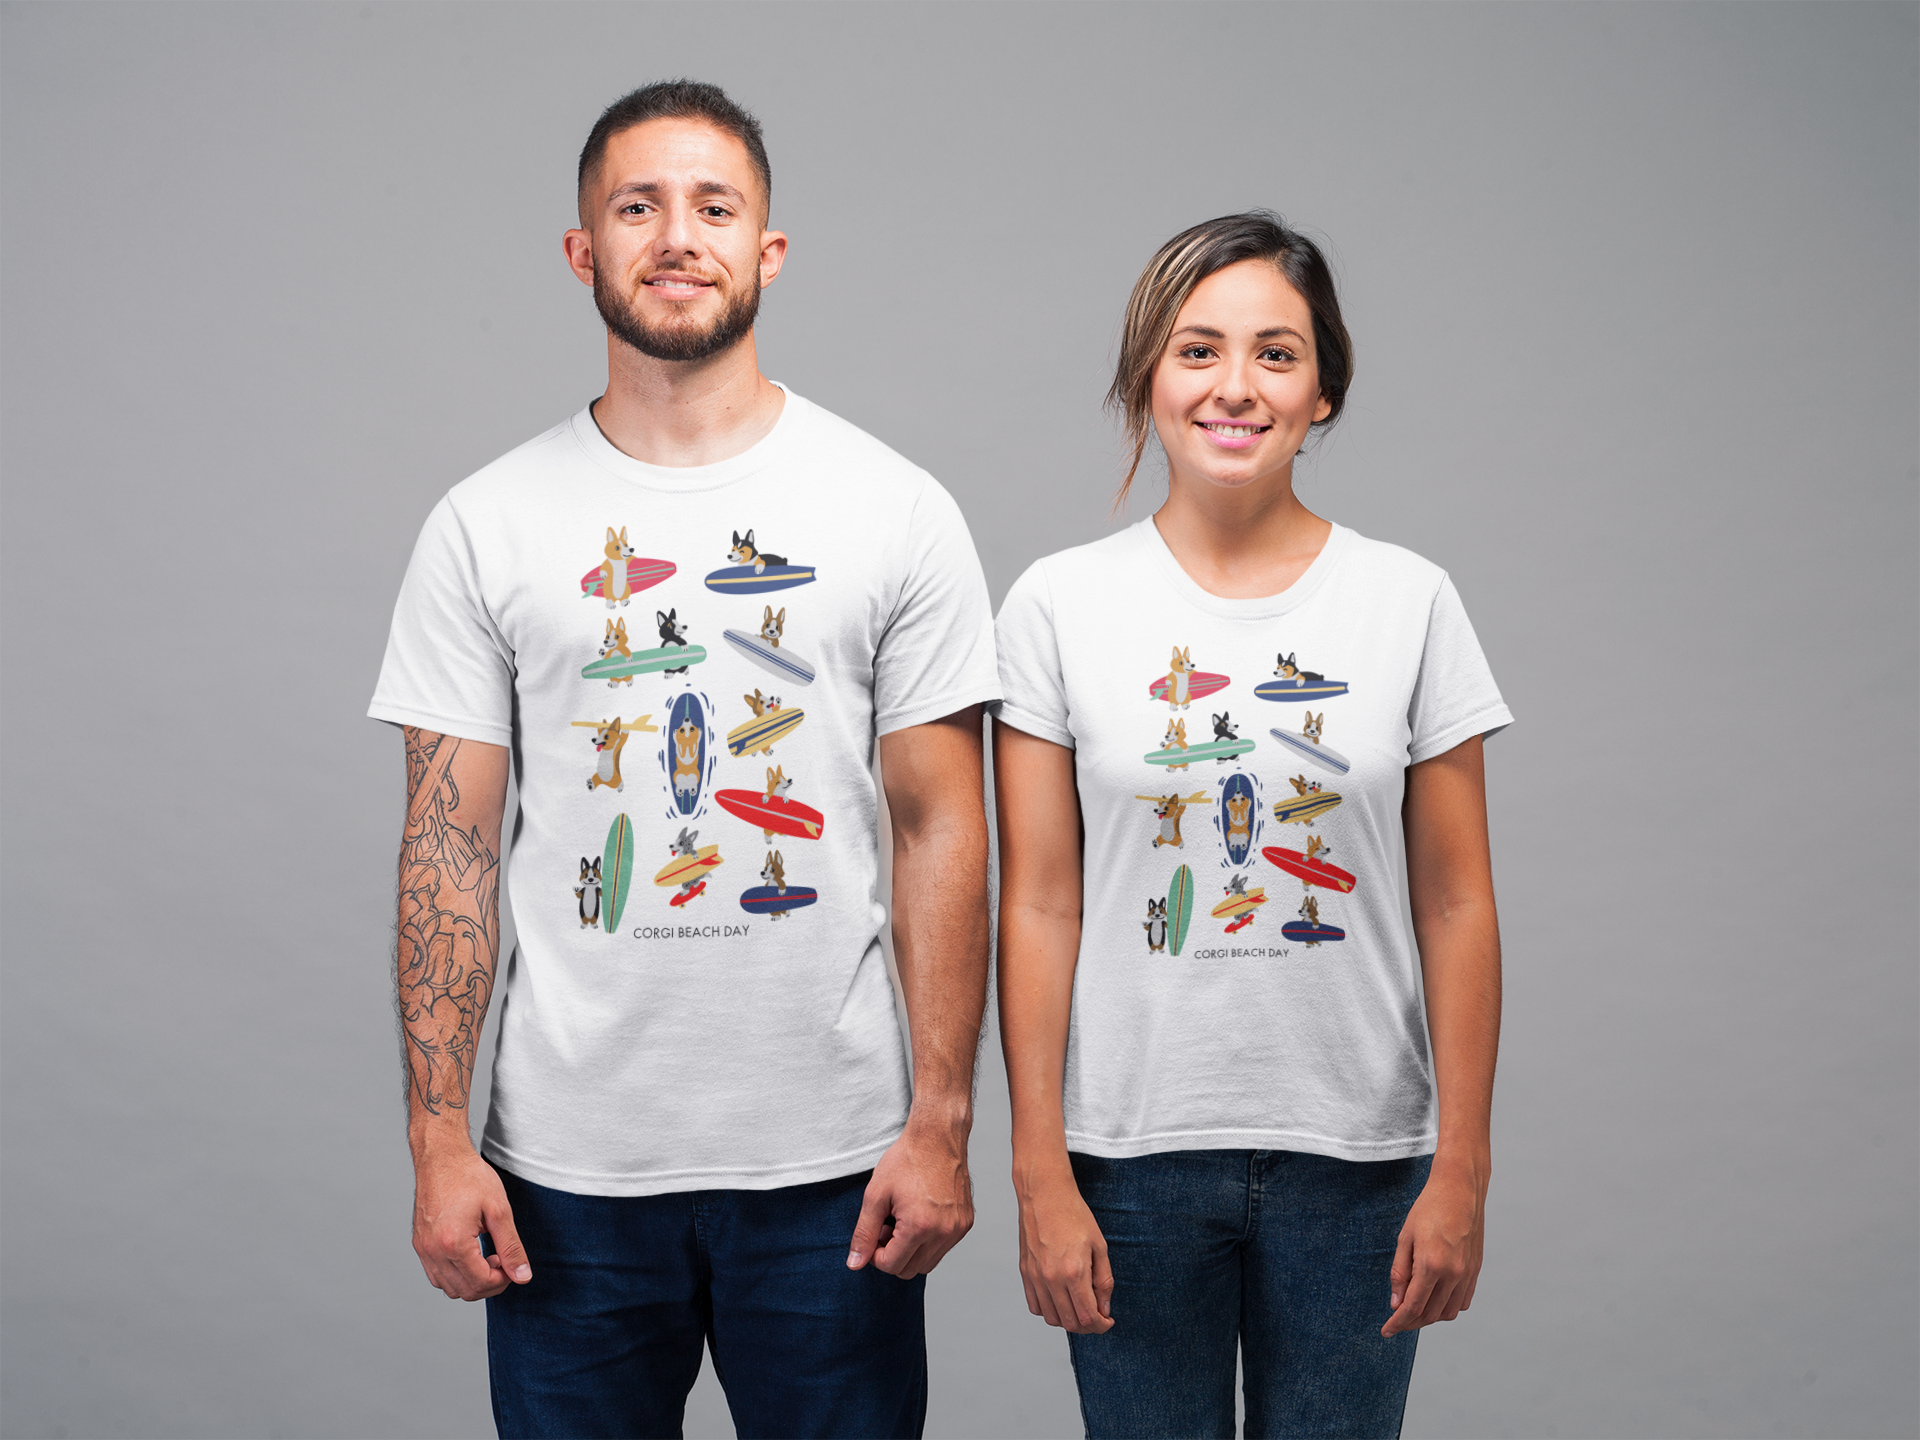 mockup-of-a-man-and-a-woman-wearing-t-shirts-and-smiling-in-a-studio-22345 (3).png